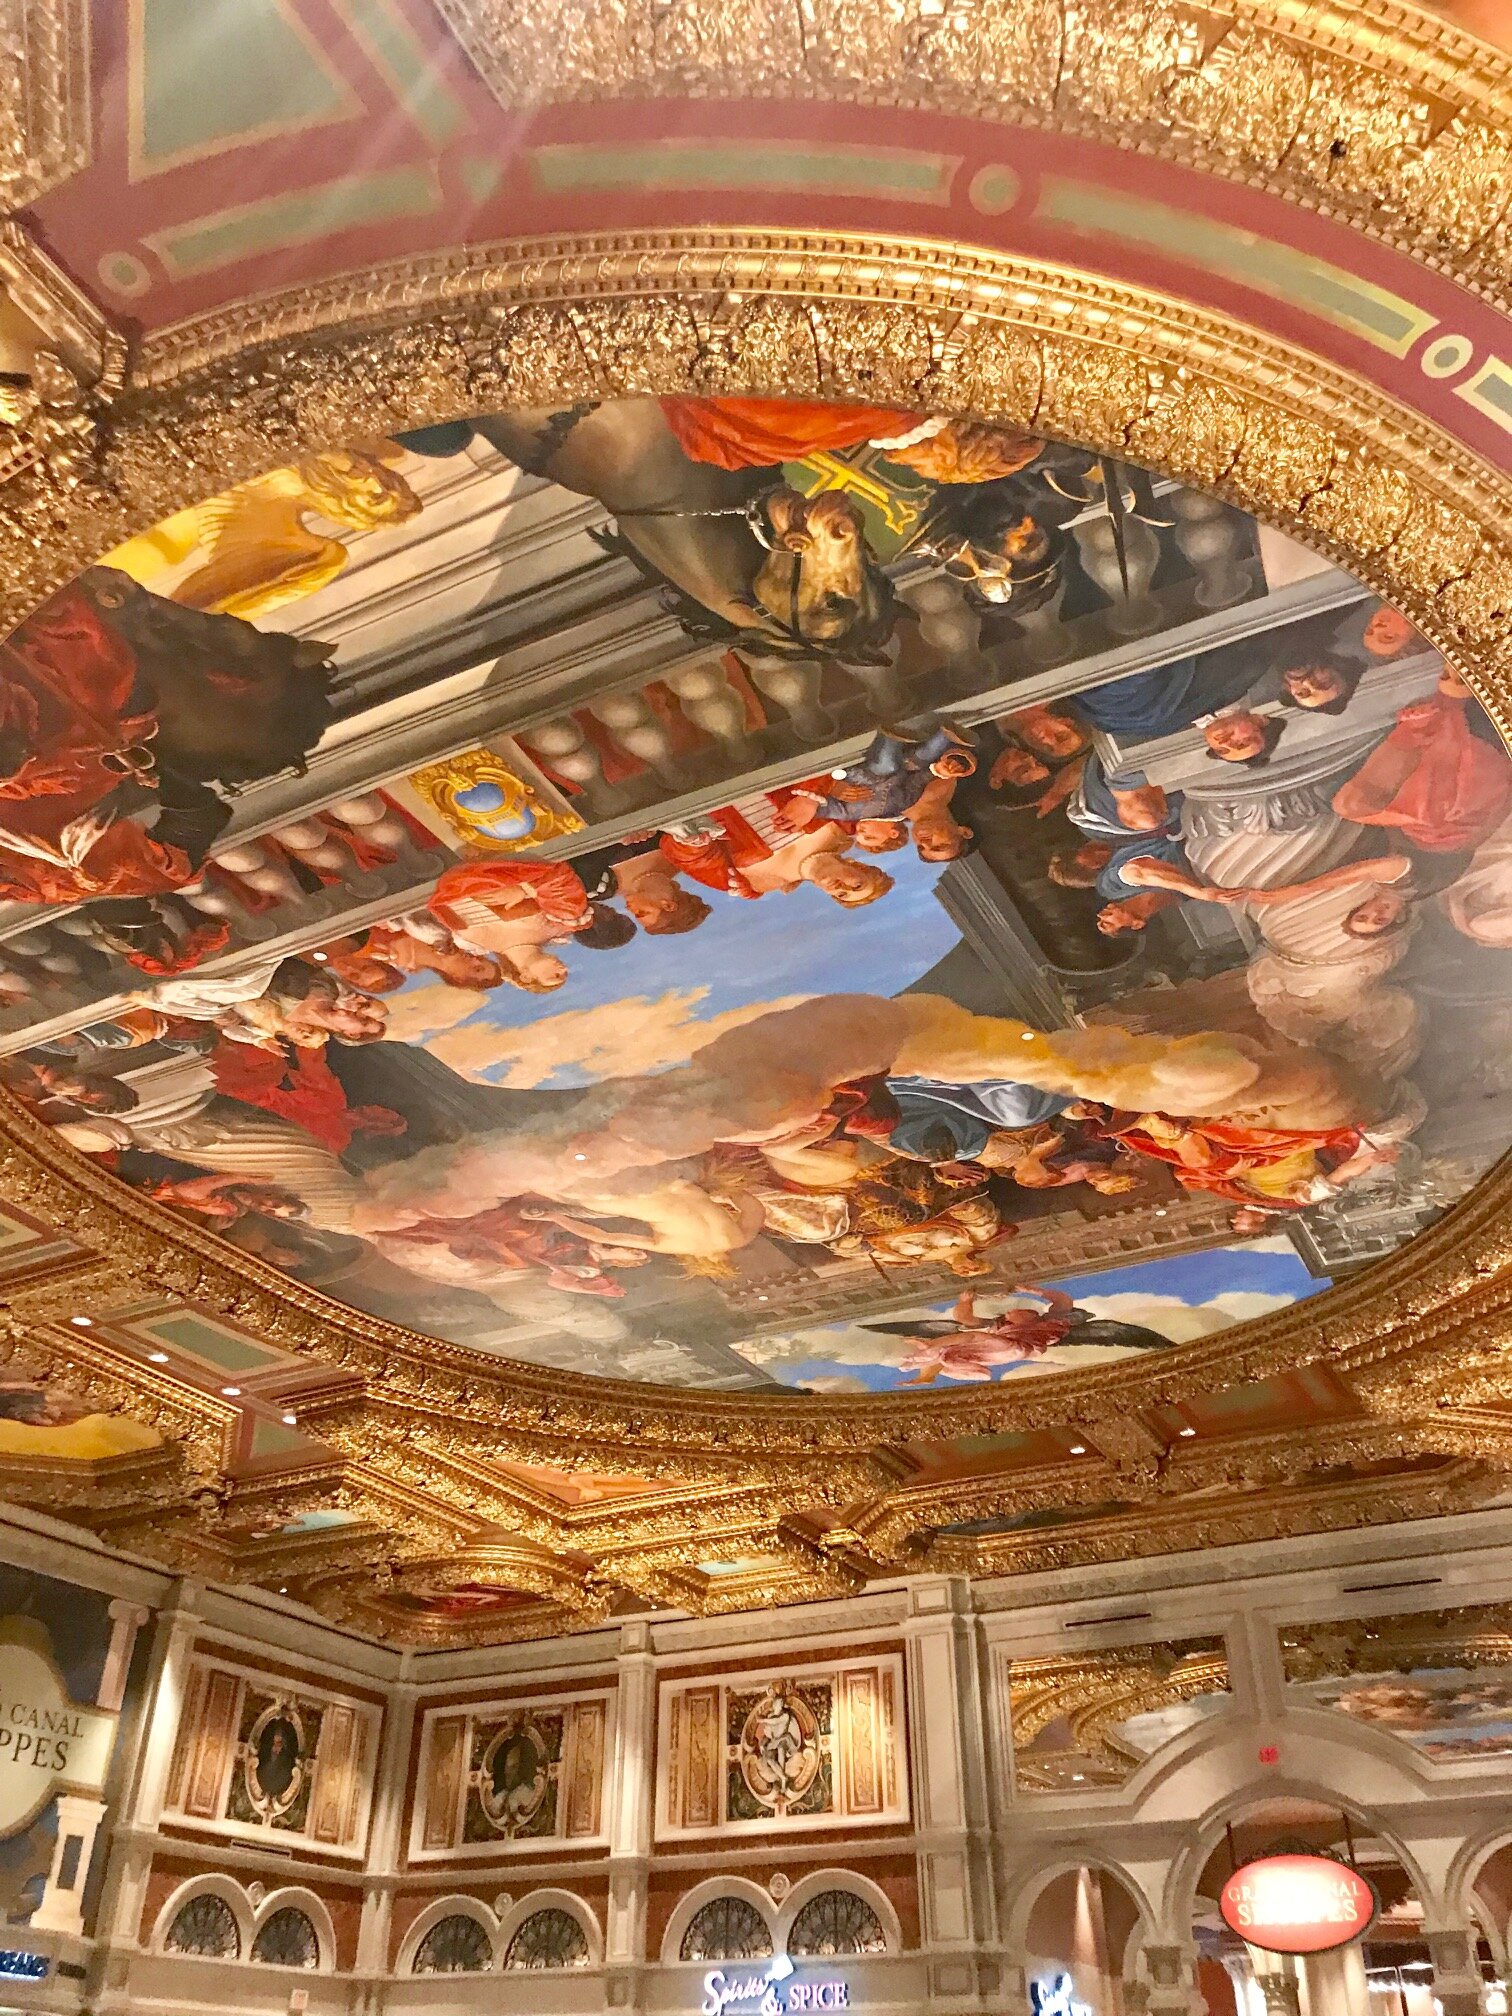 Las Vegas Travel Guide - Top things to do when in Las Vegas - The beautiful ceilings at the Venetian